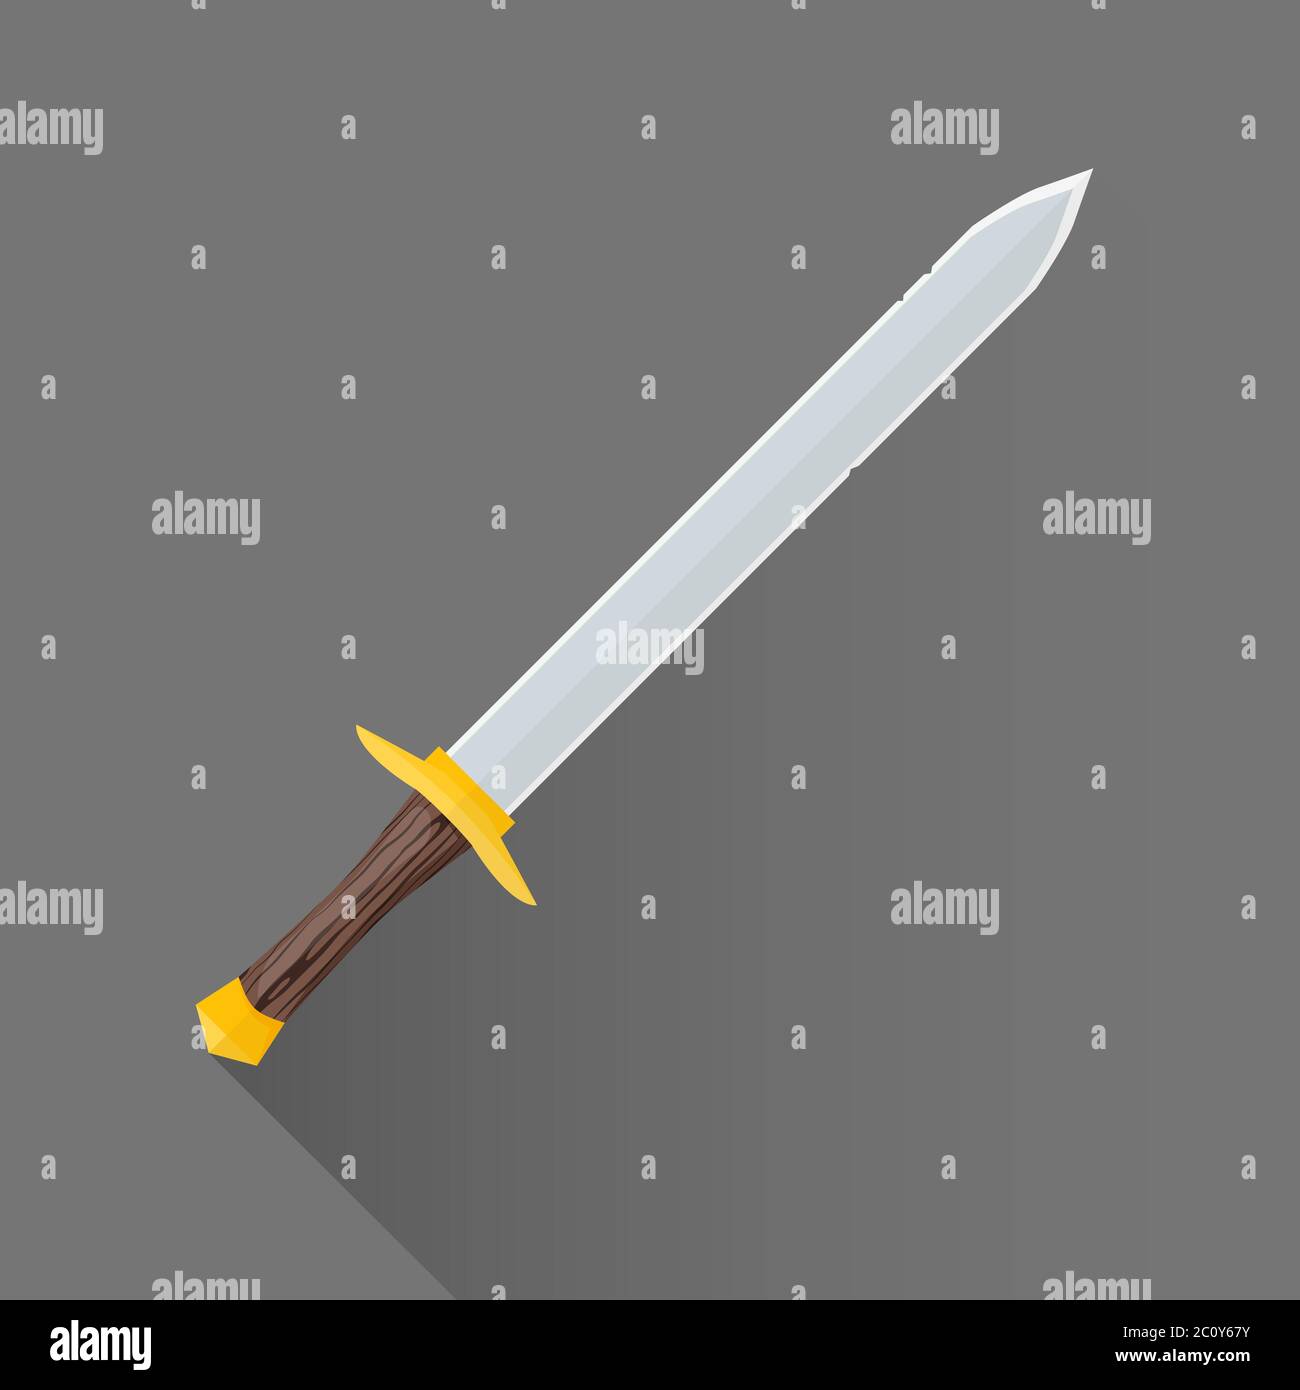 Crossed Sword Medieval Knight Weapon Soldier Item Symbol Of War And Battle  Stock Illustration - Download Image Now - iStock